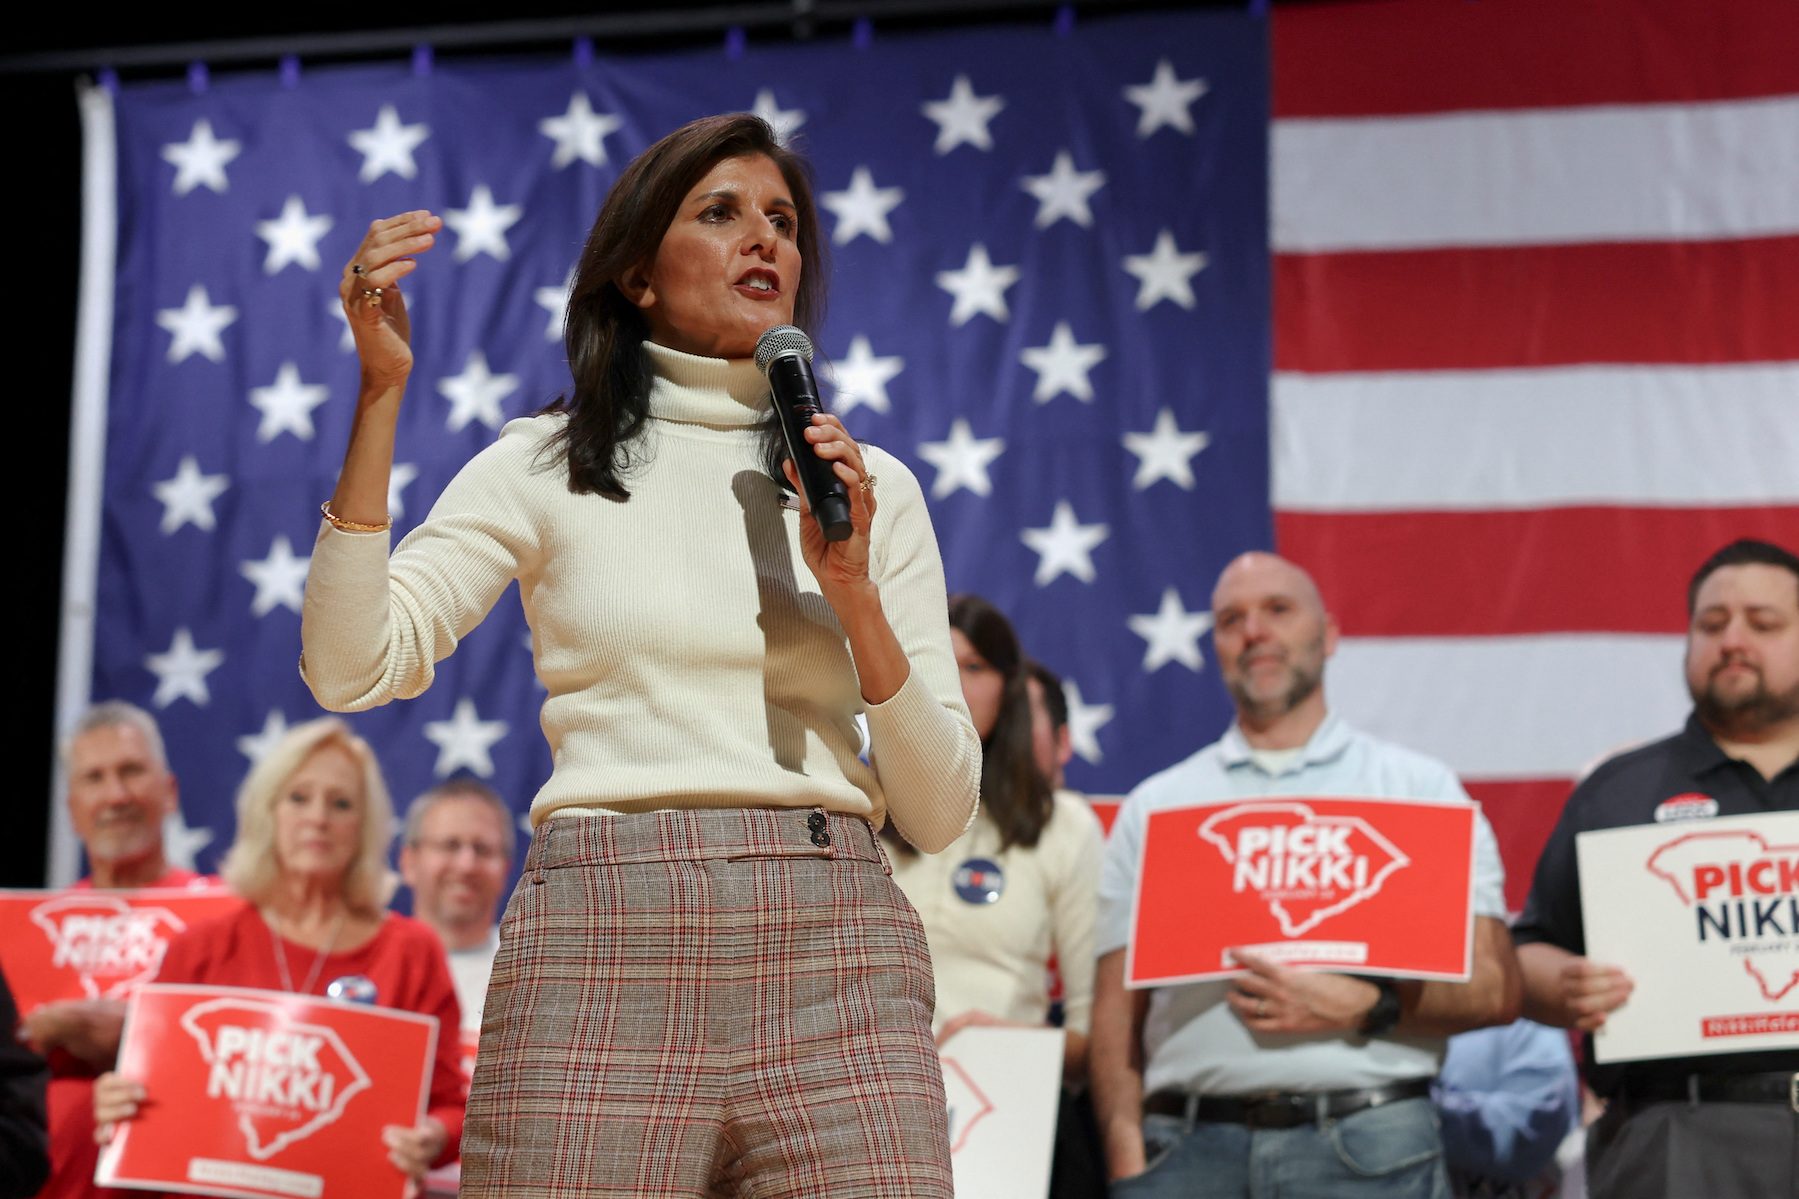 Nikki Haley set to win Nevada Republican primary, but victory will be hollow